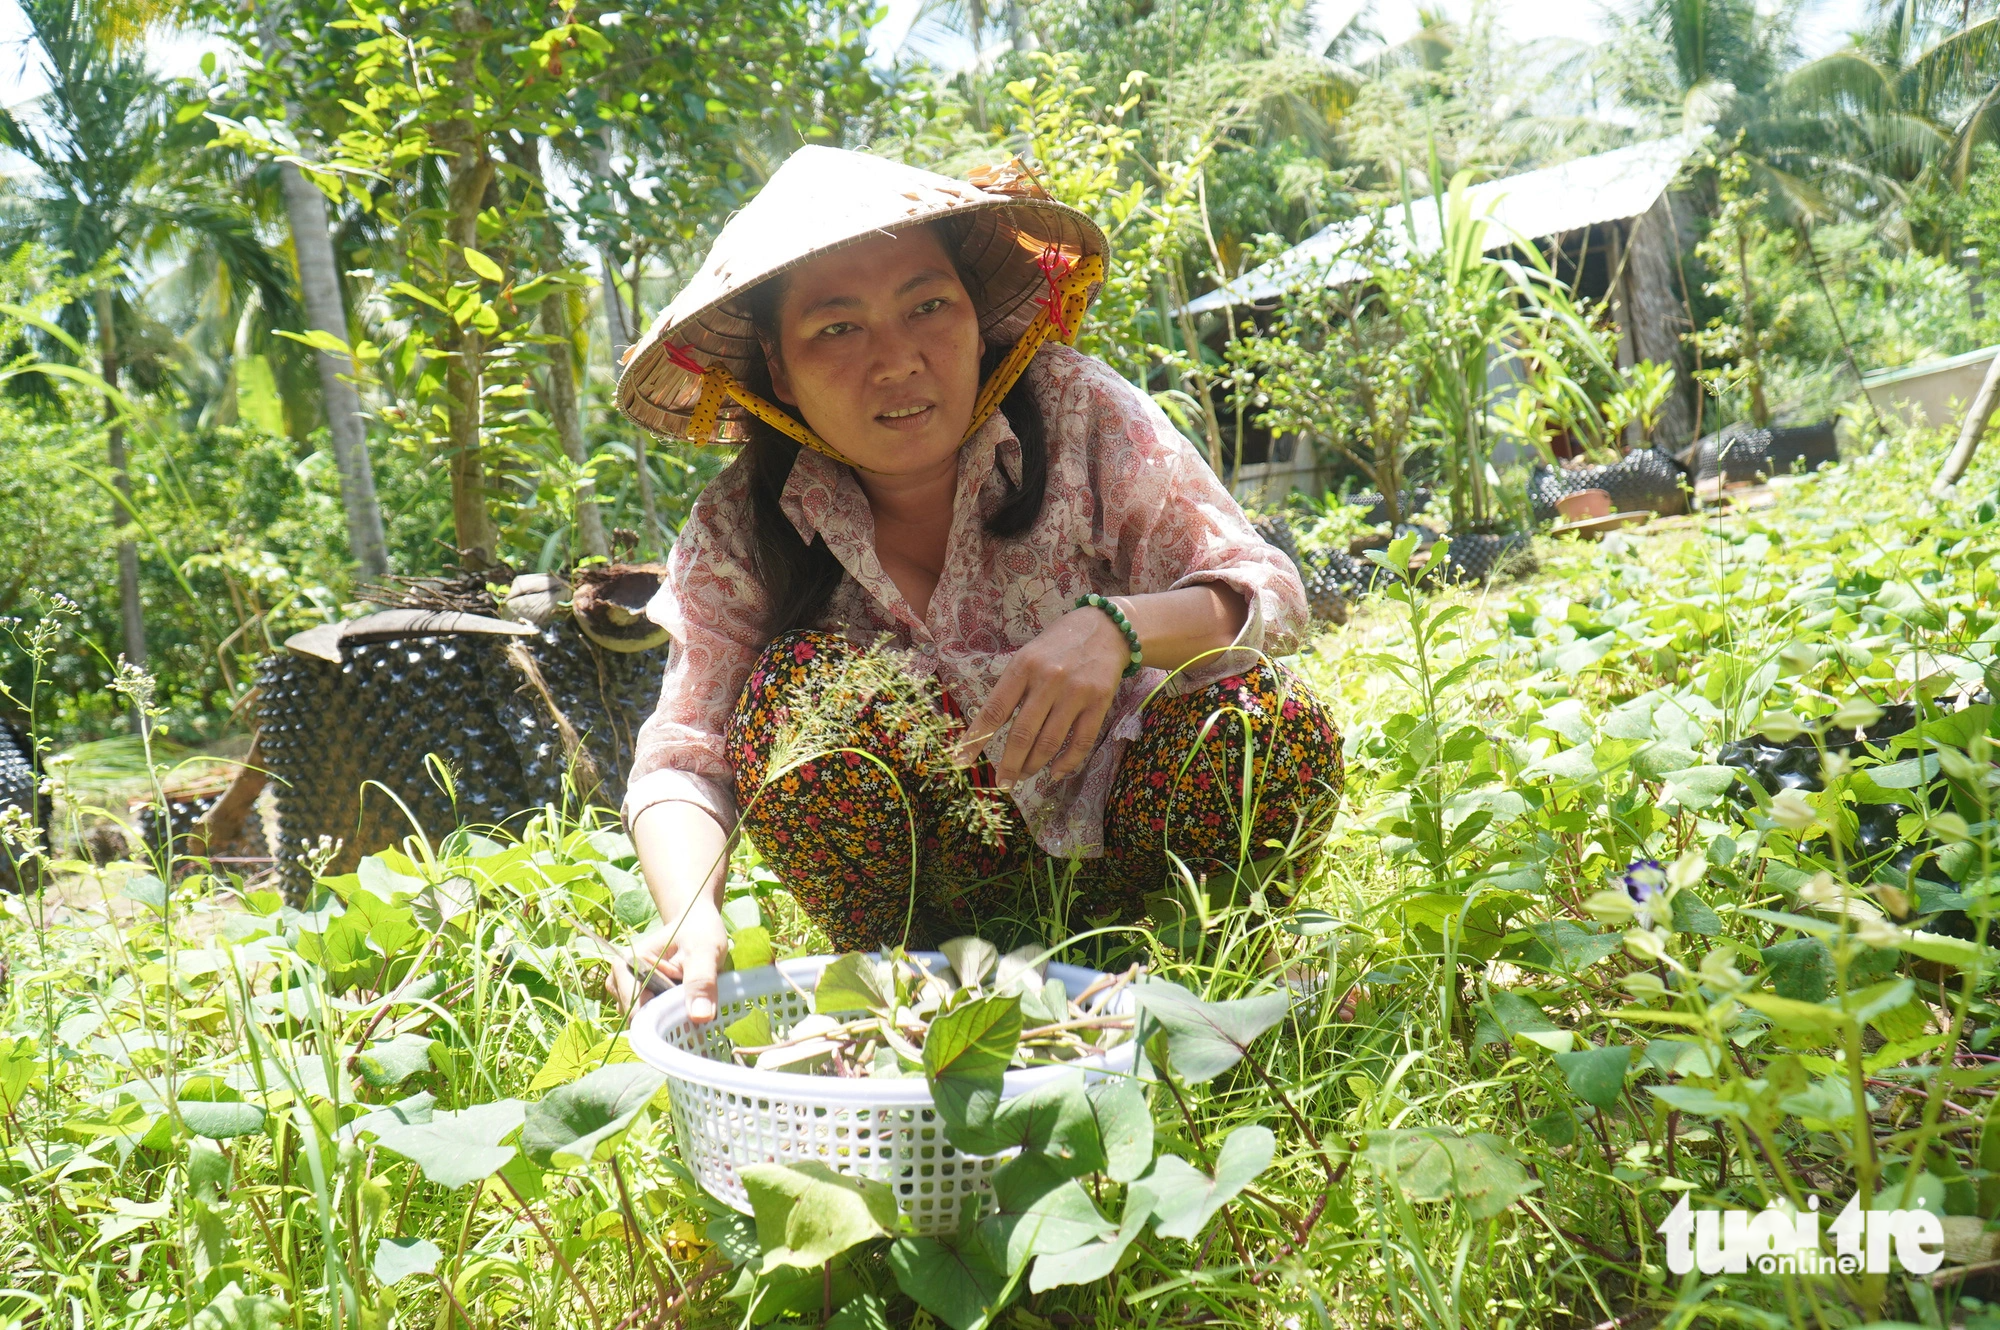 Ms Huang cuts vegetables to prepare a meal for her mother and her children - Photo: MAU Truong